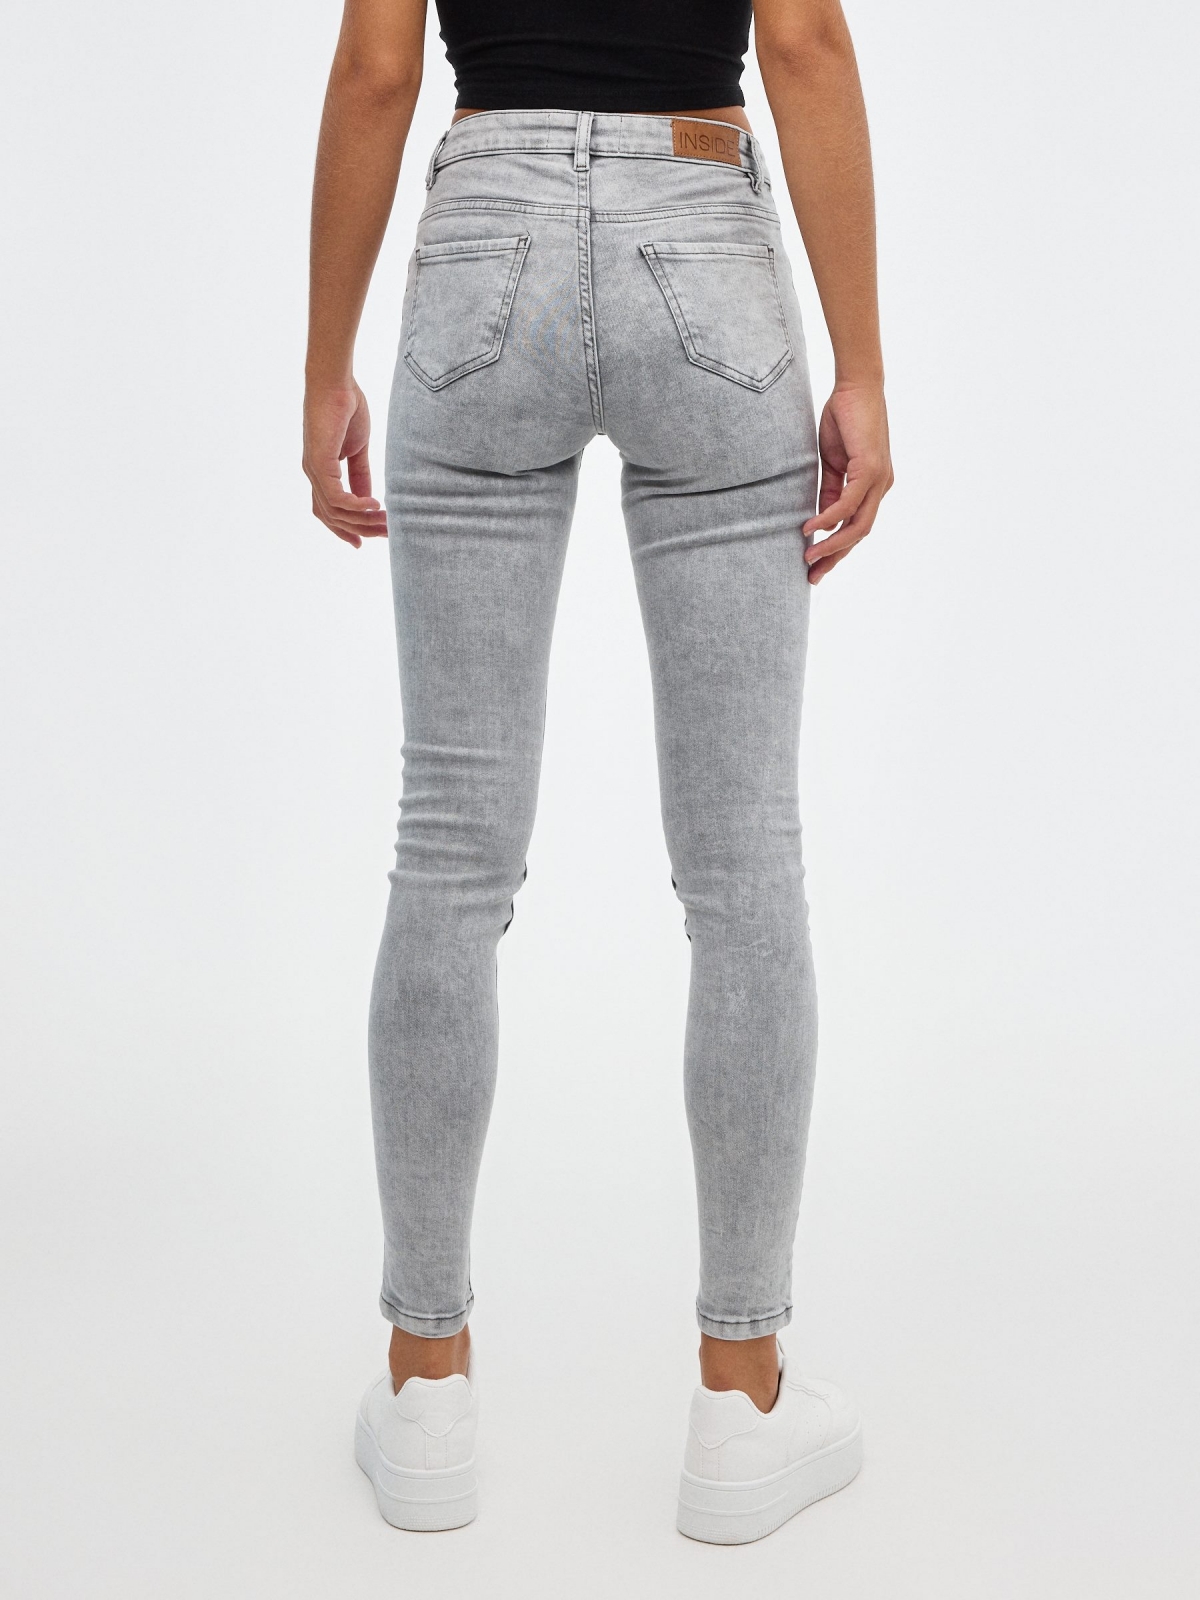 Basic gray skinny jeans grey middle back view